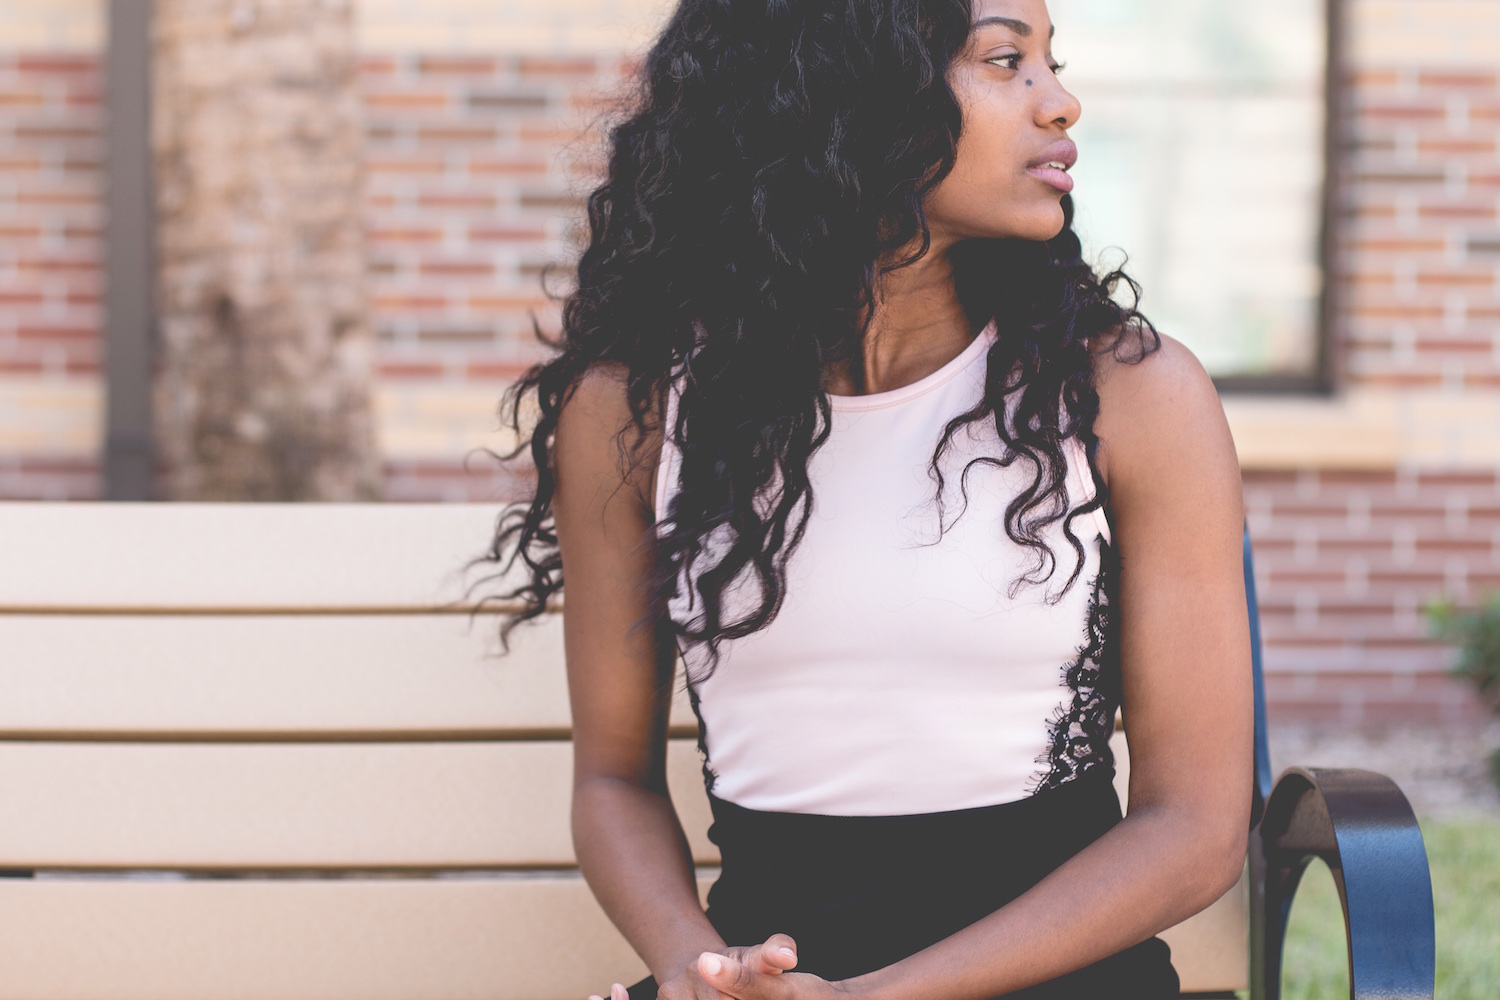 Black women who travel - a close-up of a Black woman with long curly hair sitting on a bench